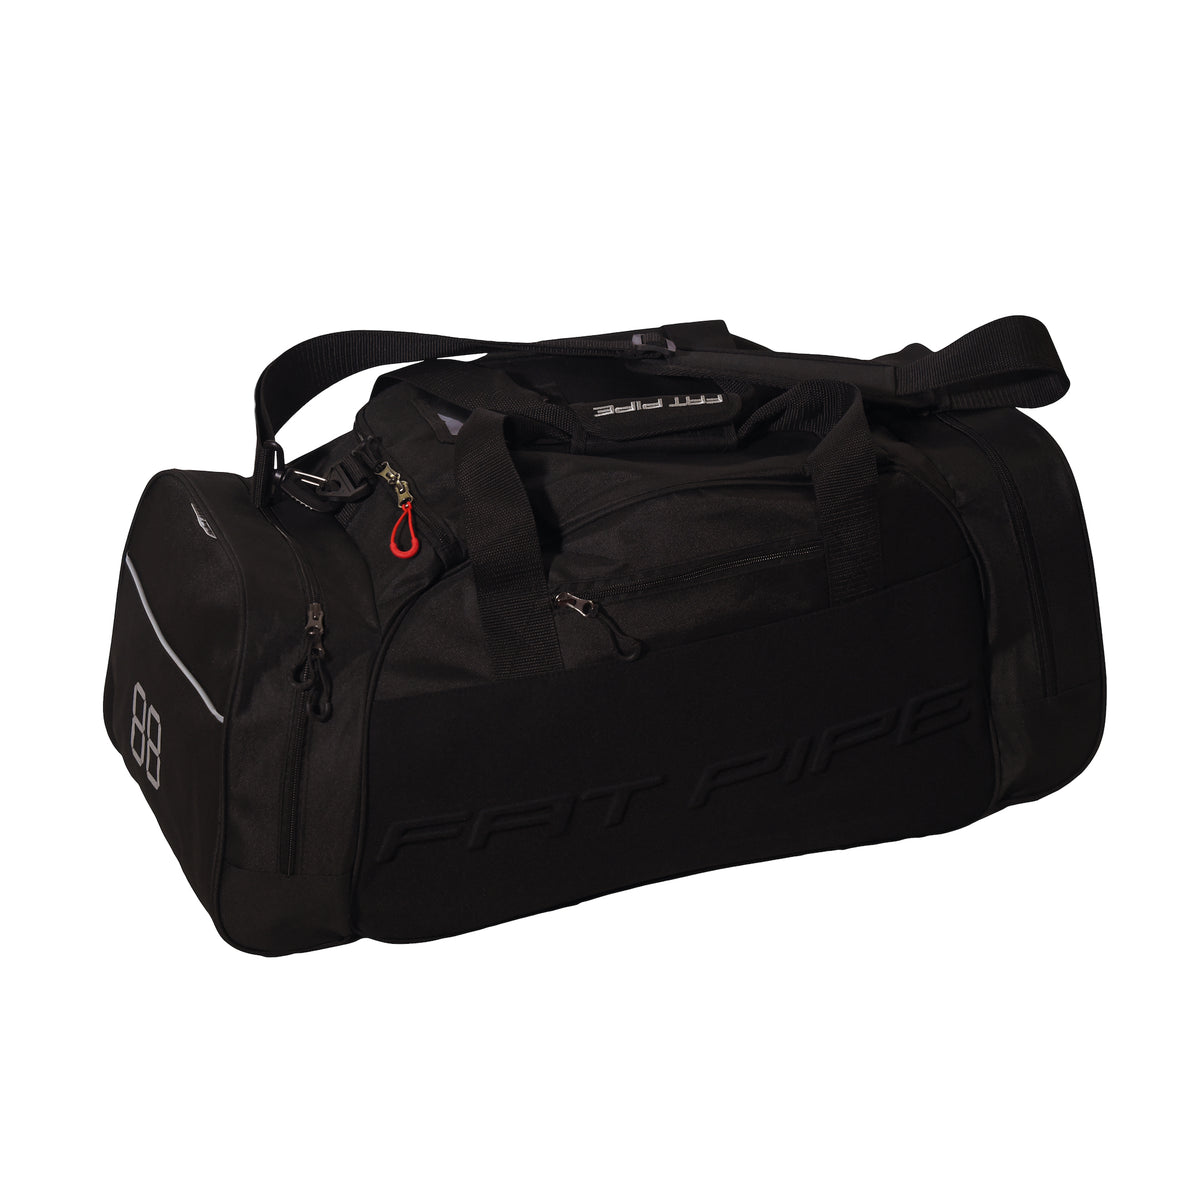 Fatpipe LUX Equipment Bag - Ongoal